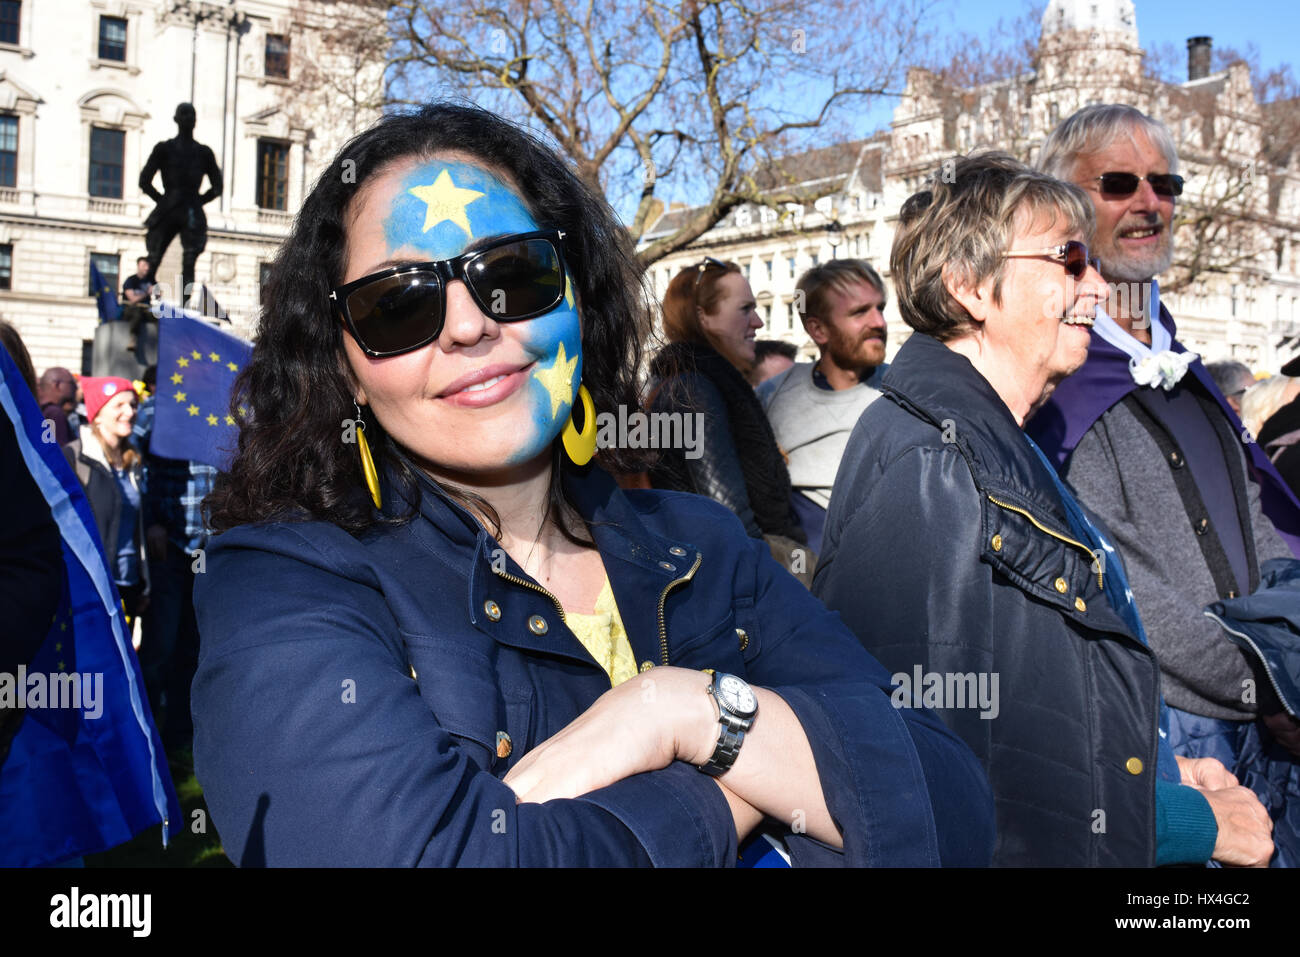 London, UK. 25th Mar, 2017. A pro-EU protester at the March for Europe rally in Parliament Square. Thousands marched from Park Lane to Parliament Square to oppose Brexit and support the European Union. Credit: Jacob Sacks-Jones/Alamy Live News. Stock Photo